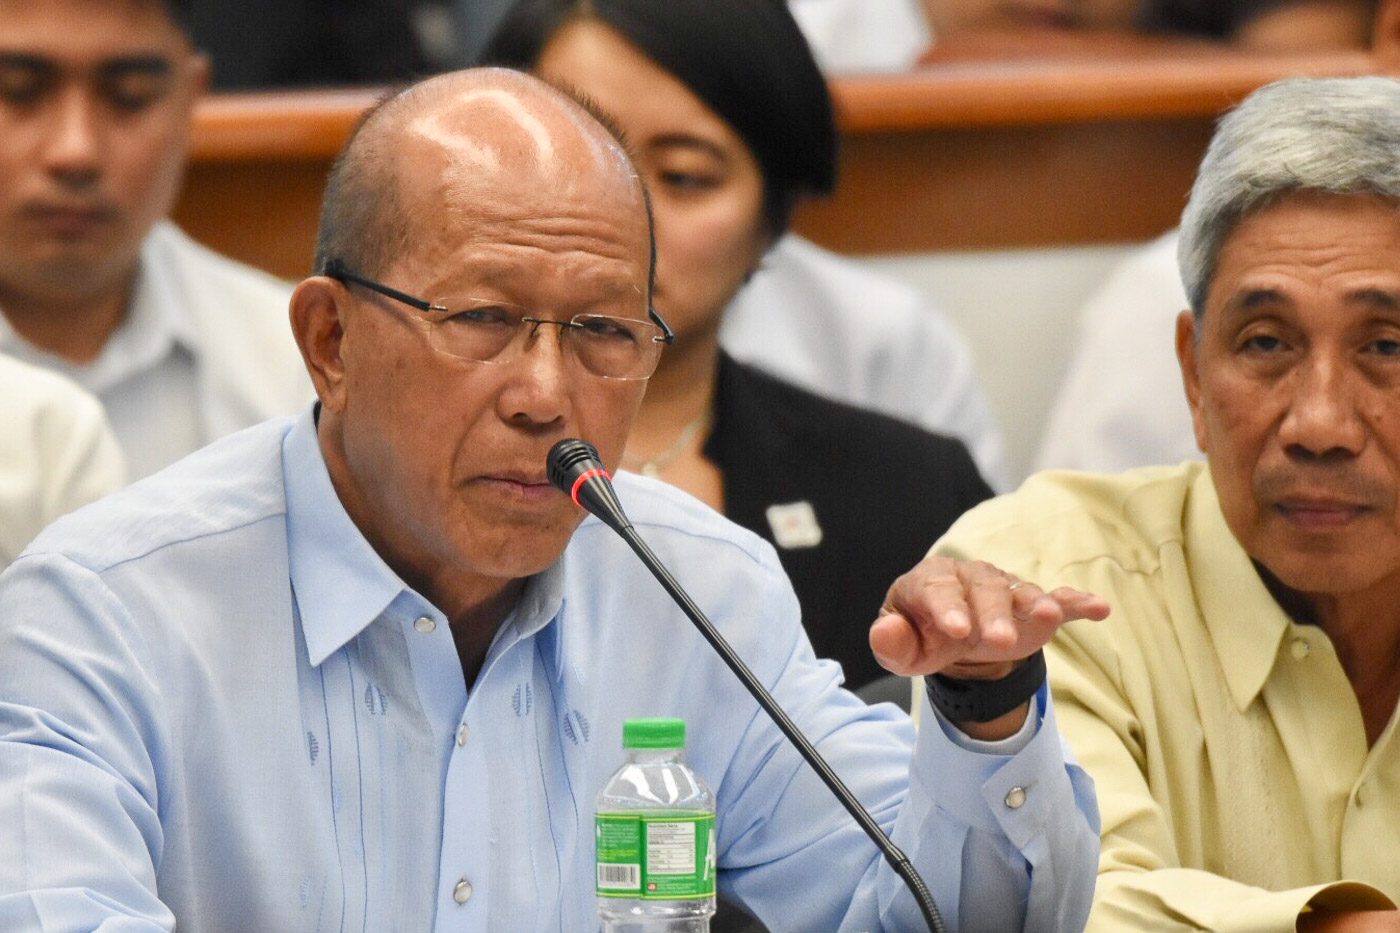 Lorenzana, Mercado support call to pay extra for preferred frigate system